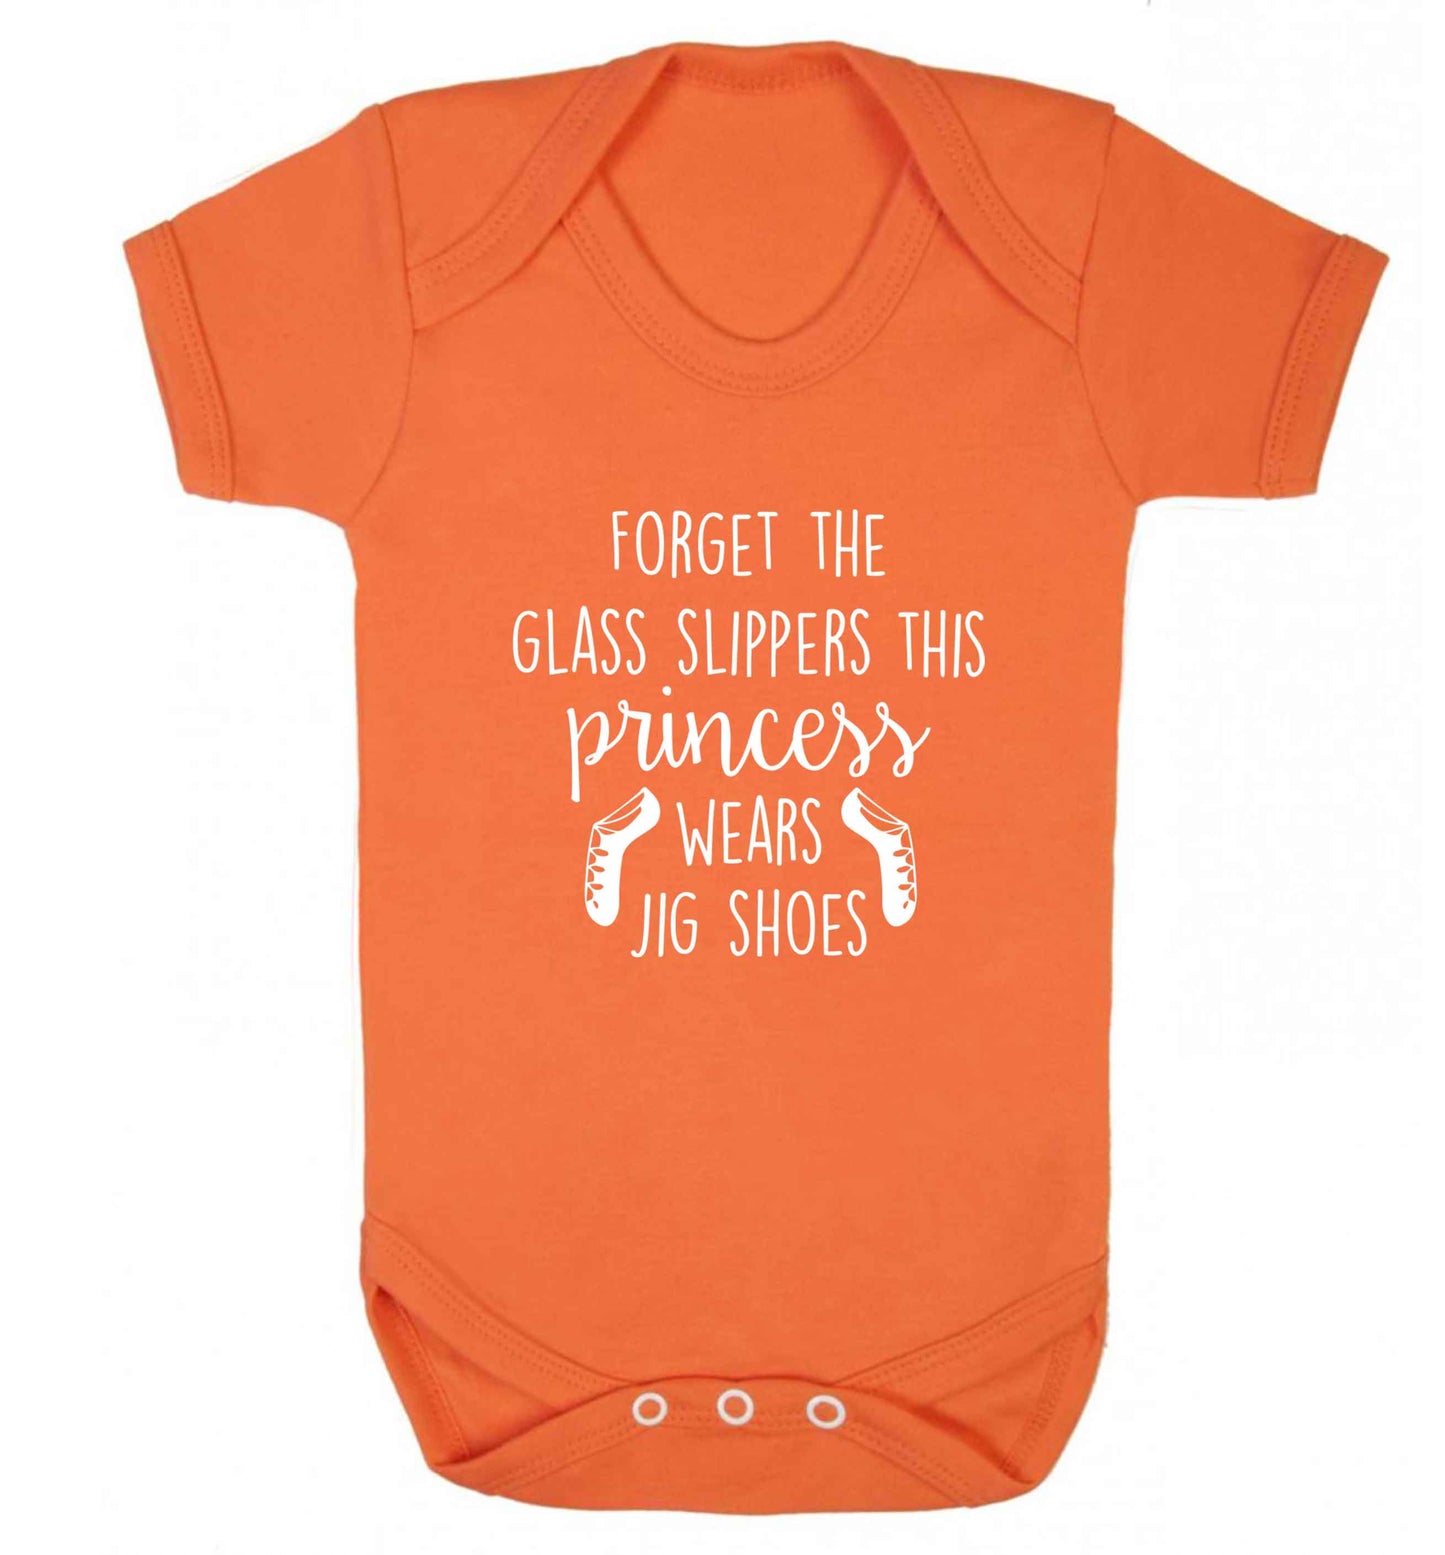 This princess wears jig shoes baby vest orange 18-24 months